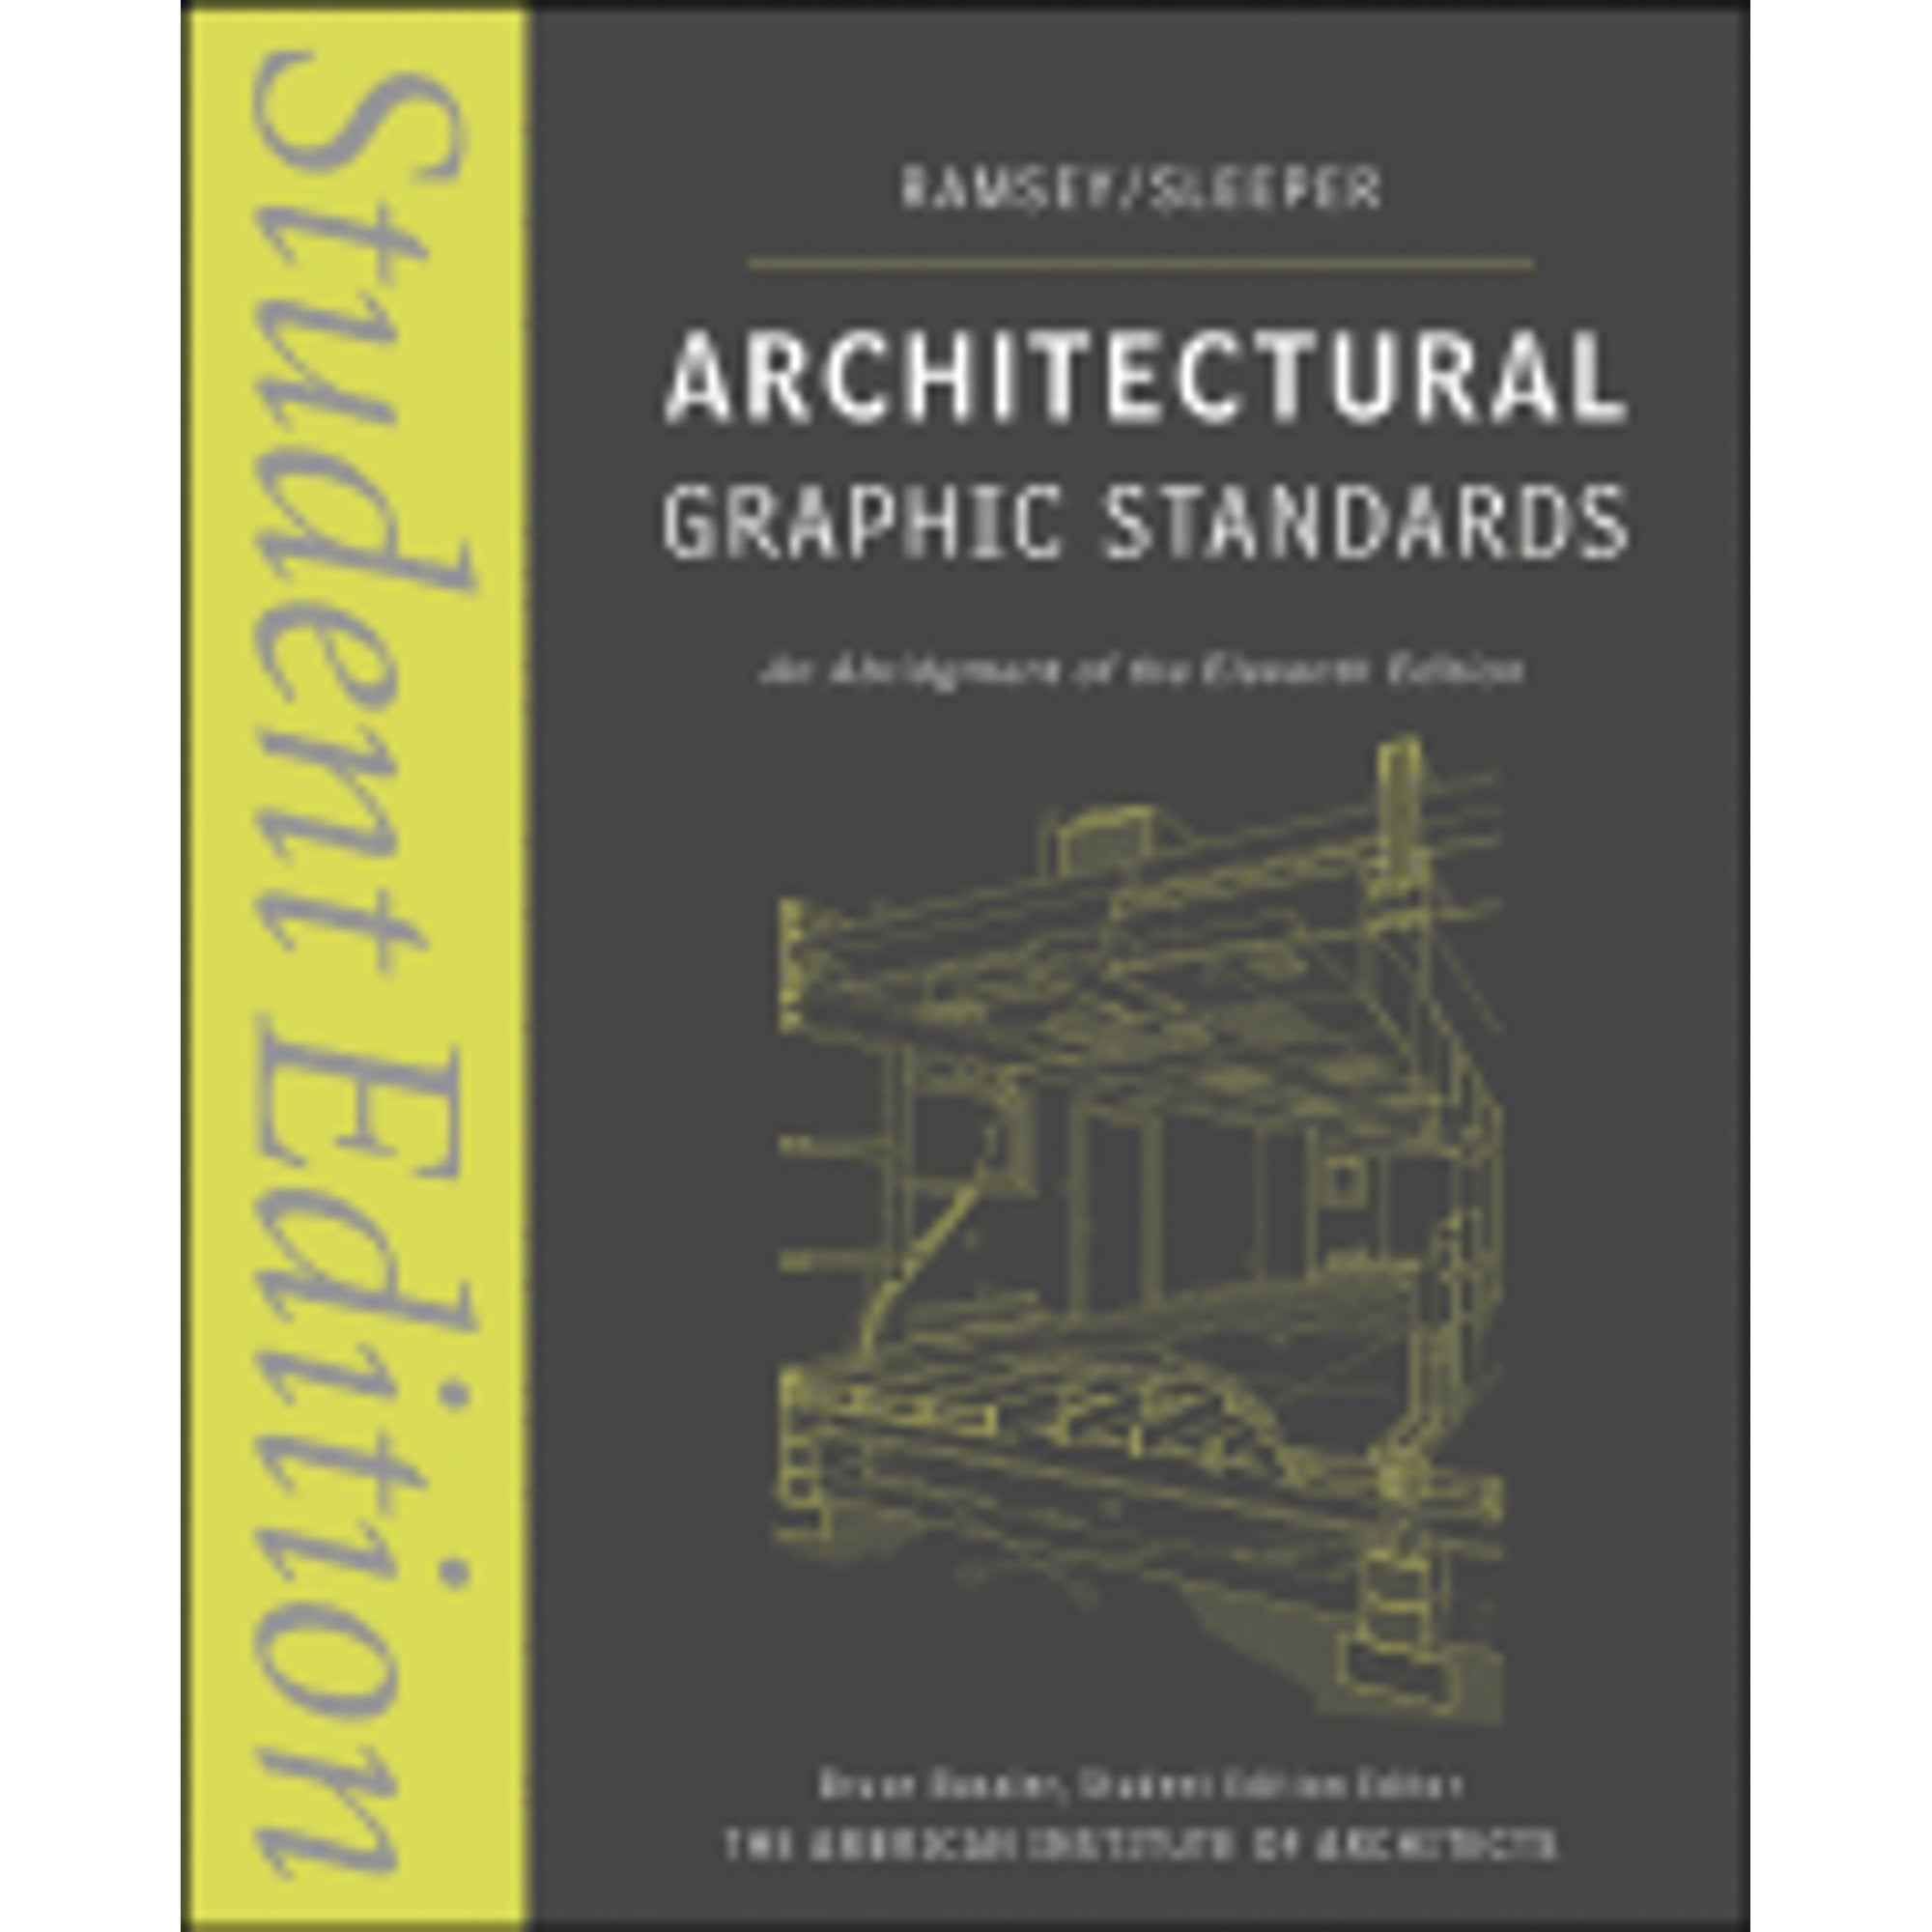 Pre-Owned Architectural Graphic Standards (Paperback 9780470085462) by Charles George Ramsey, Harold Reeve Sleeper, Keith E Hedges